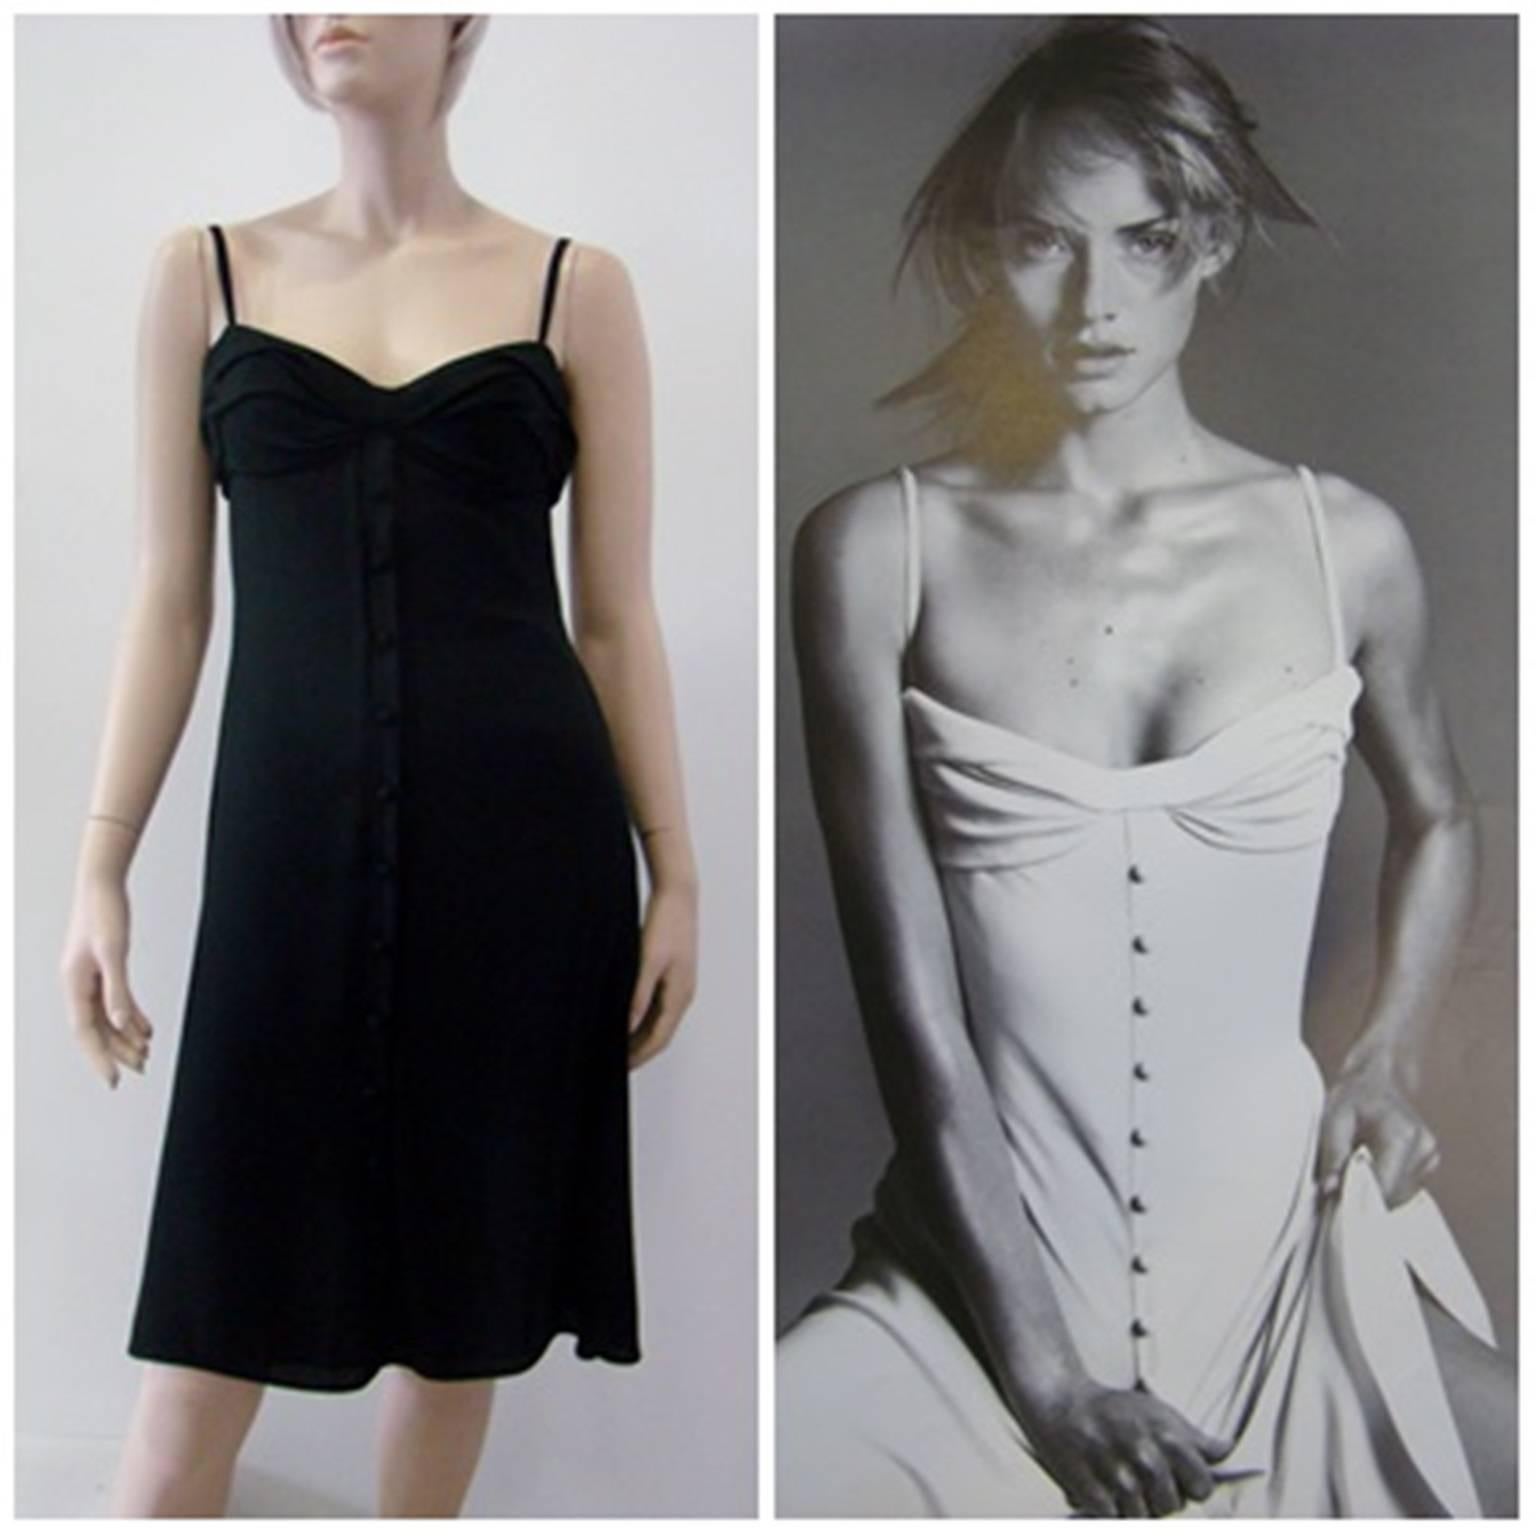 Gianni Versace Couture Front Buttoning Dress Spring 1996 For Sale 4